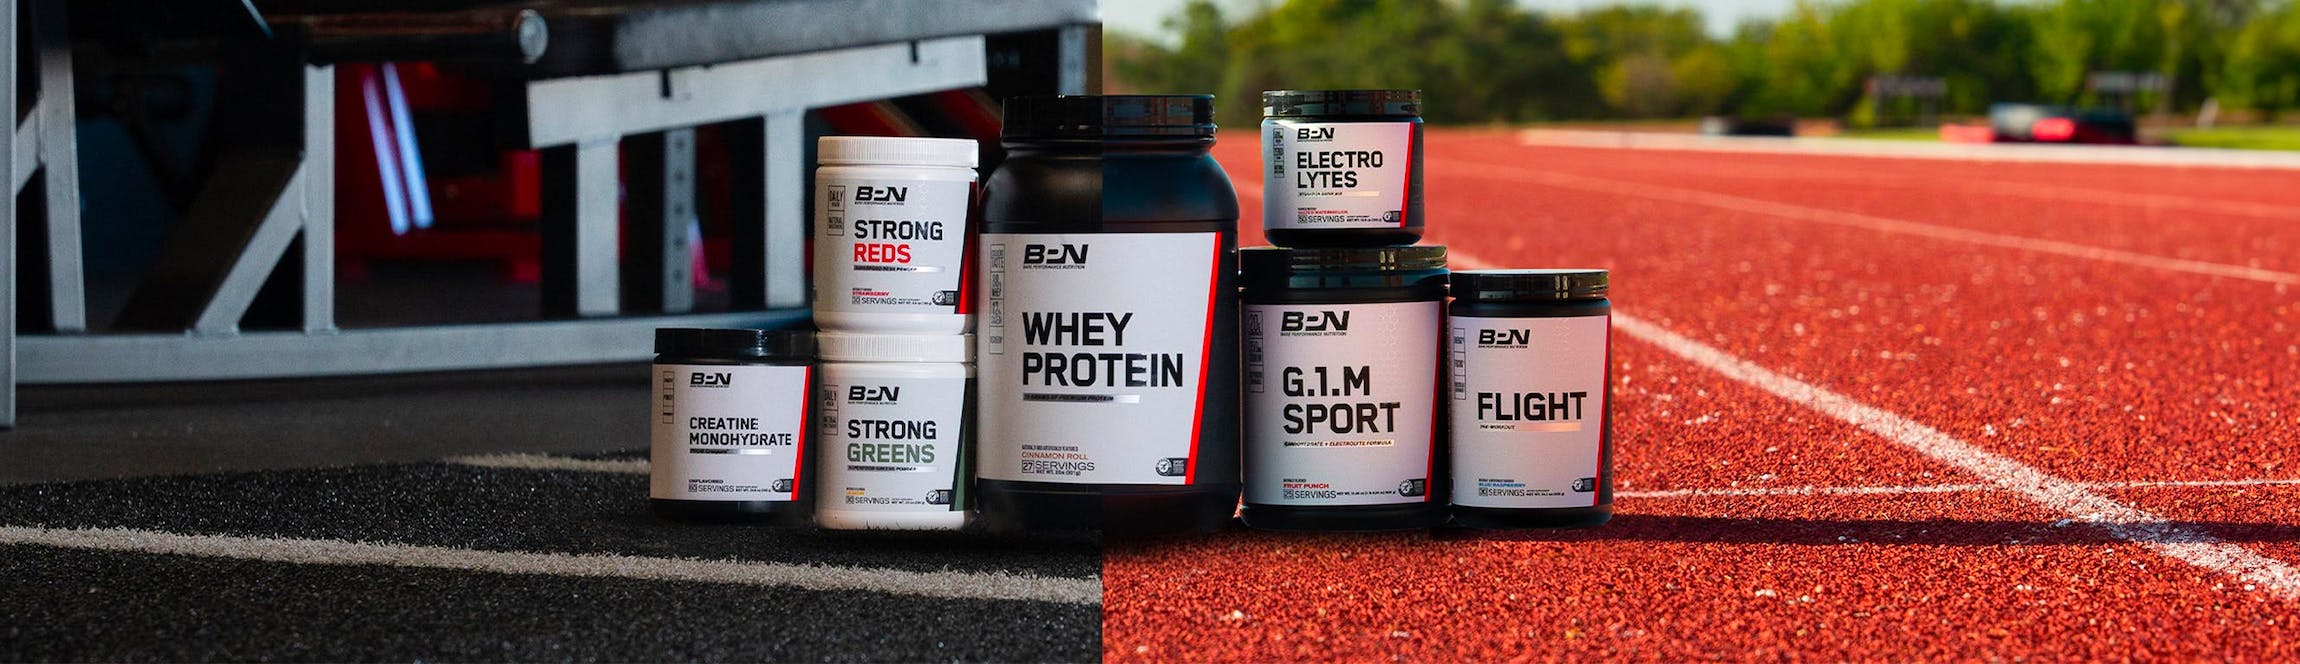 BPN Hybrid Athlete Bundle Supplements. Includes Whey Protein, Flight, Creatine, Electrolytes, G.1.M Sport, Strong Greens, and Strong Reds